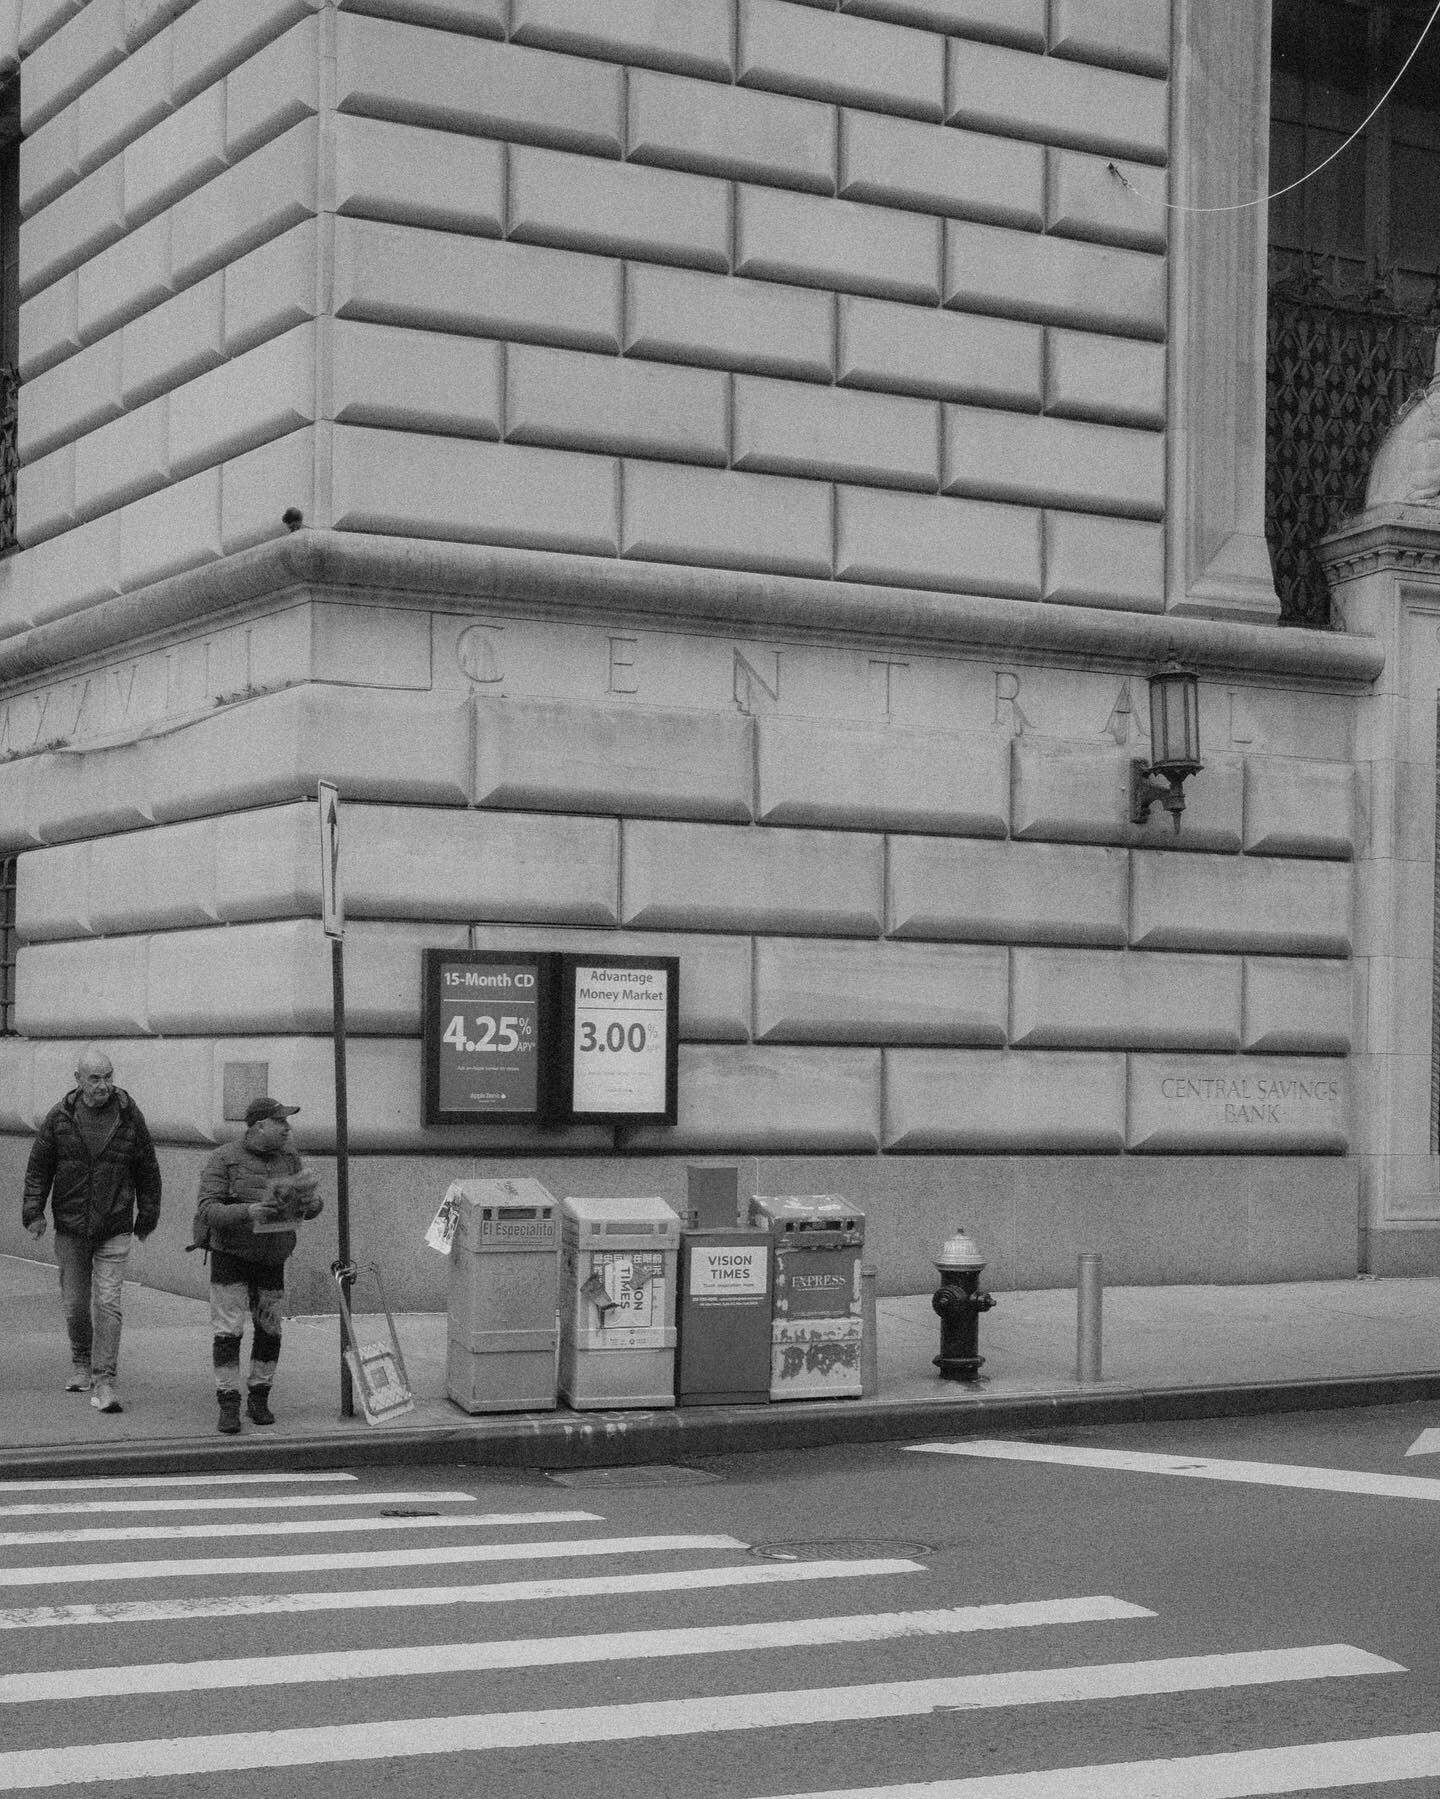 moments in the crosswalk
captured using a #fujix100v